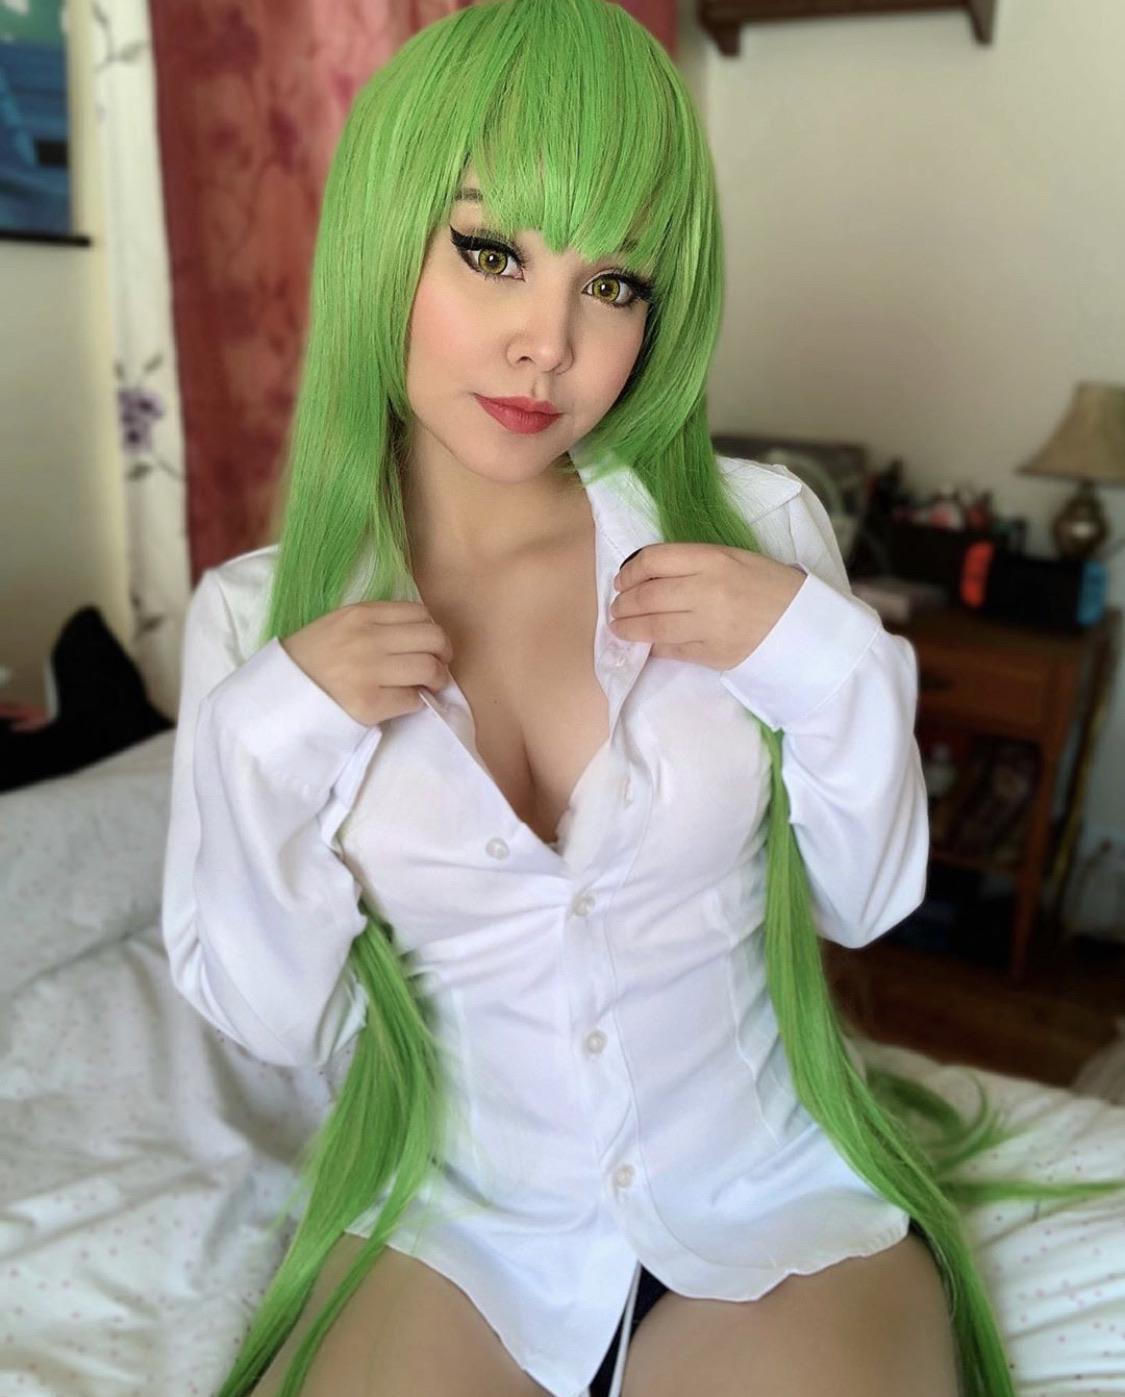 Code Geass Cosplay Porn - View C.C. From Code Geass by _Chibikaty for free | Simply-Cosplay